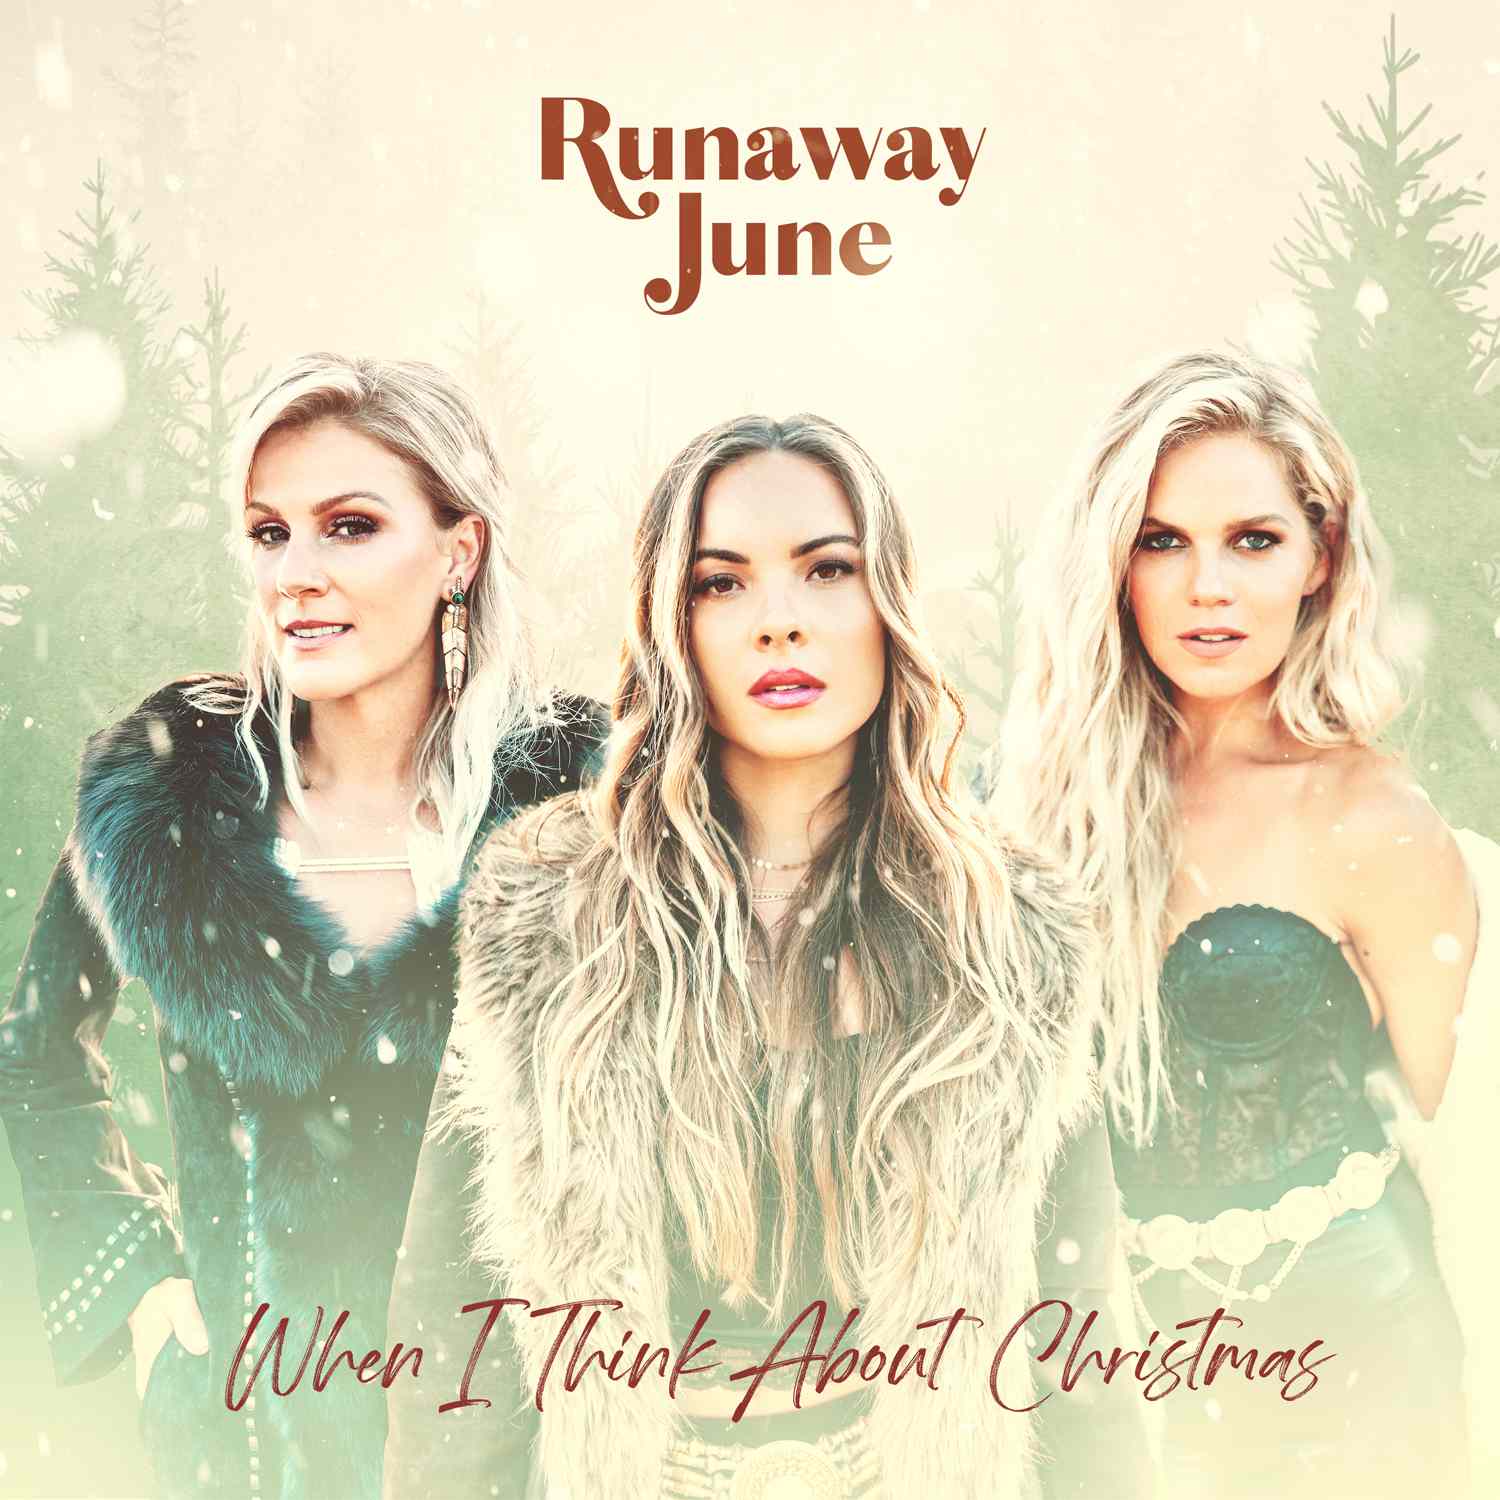 Runaway June - When I Think About Christmas